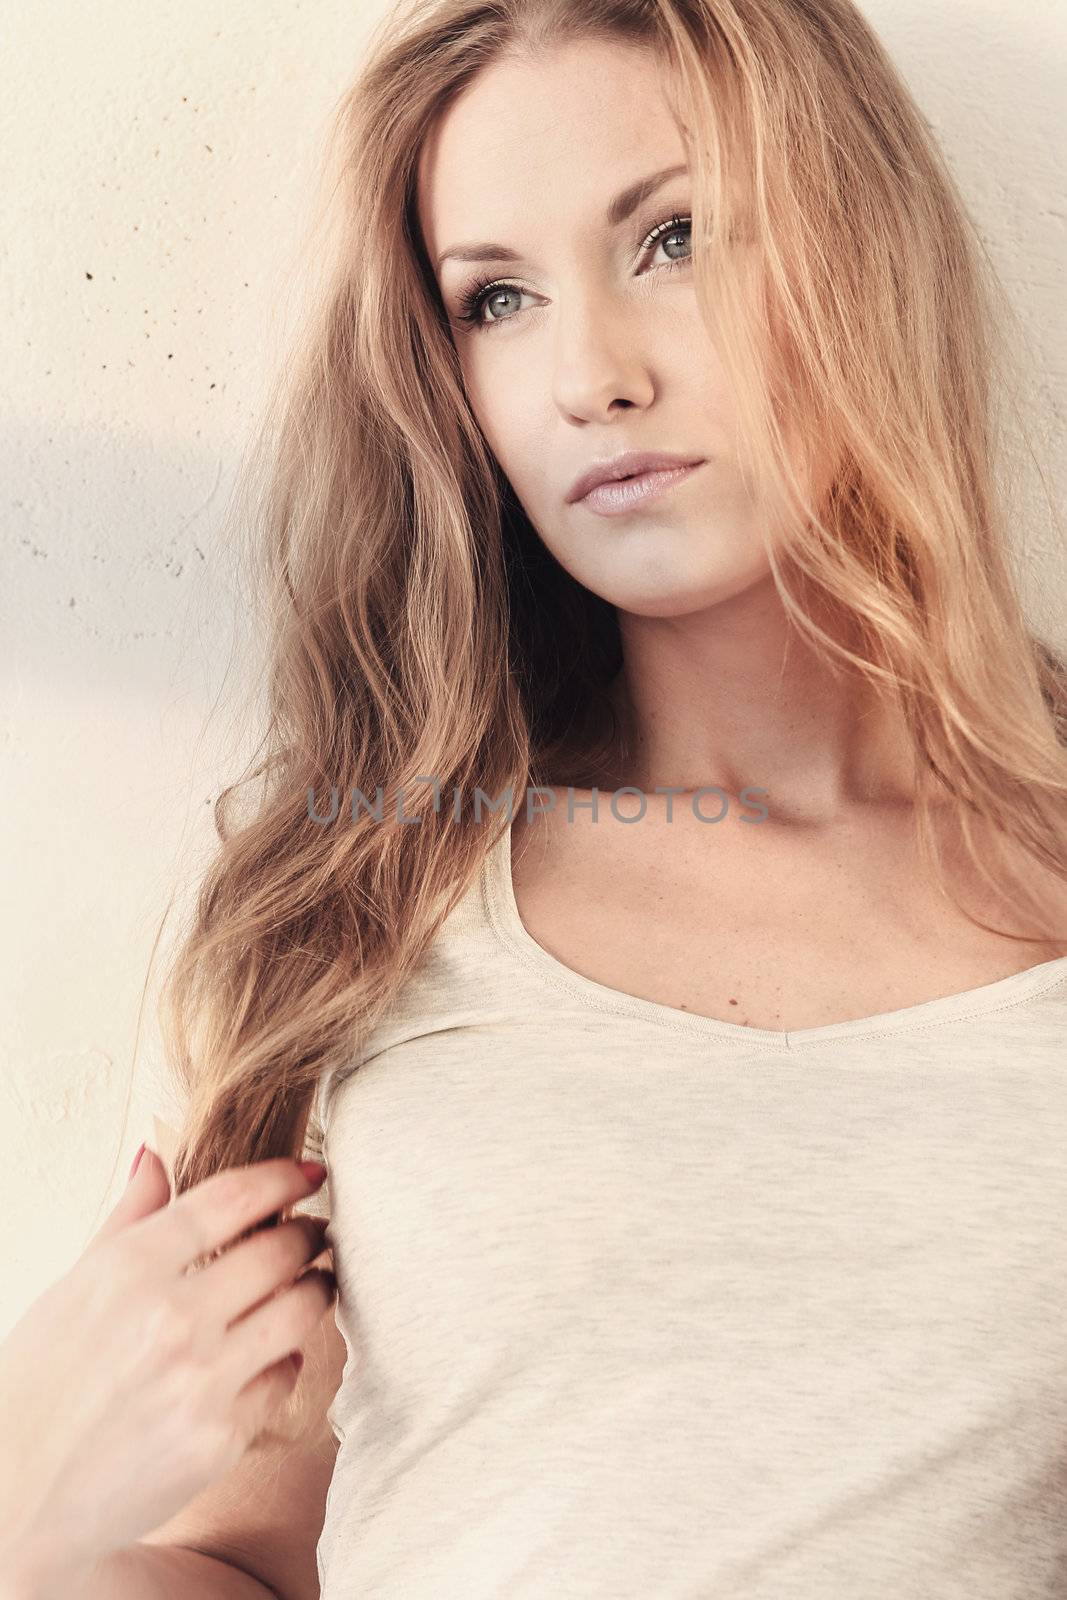 Very beautiful girl with natural beauty by robert_przybysz